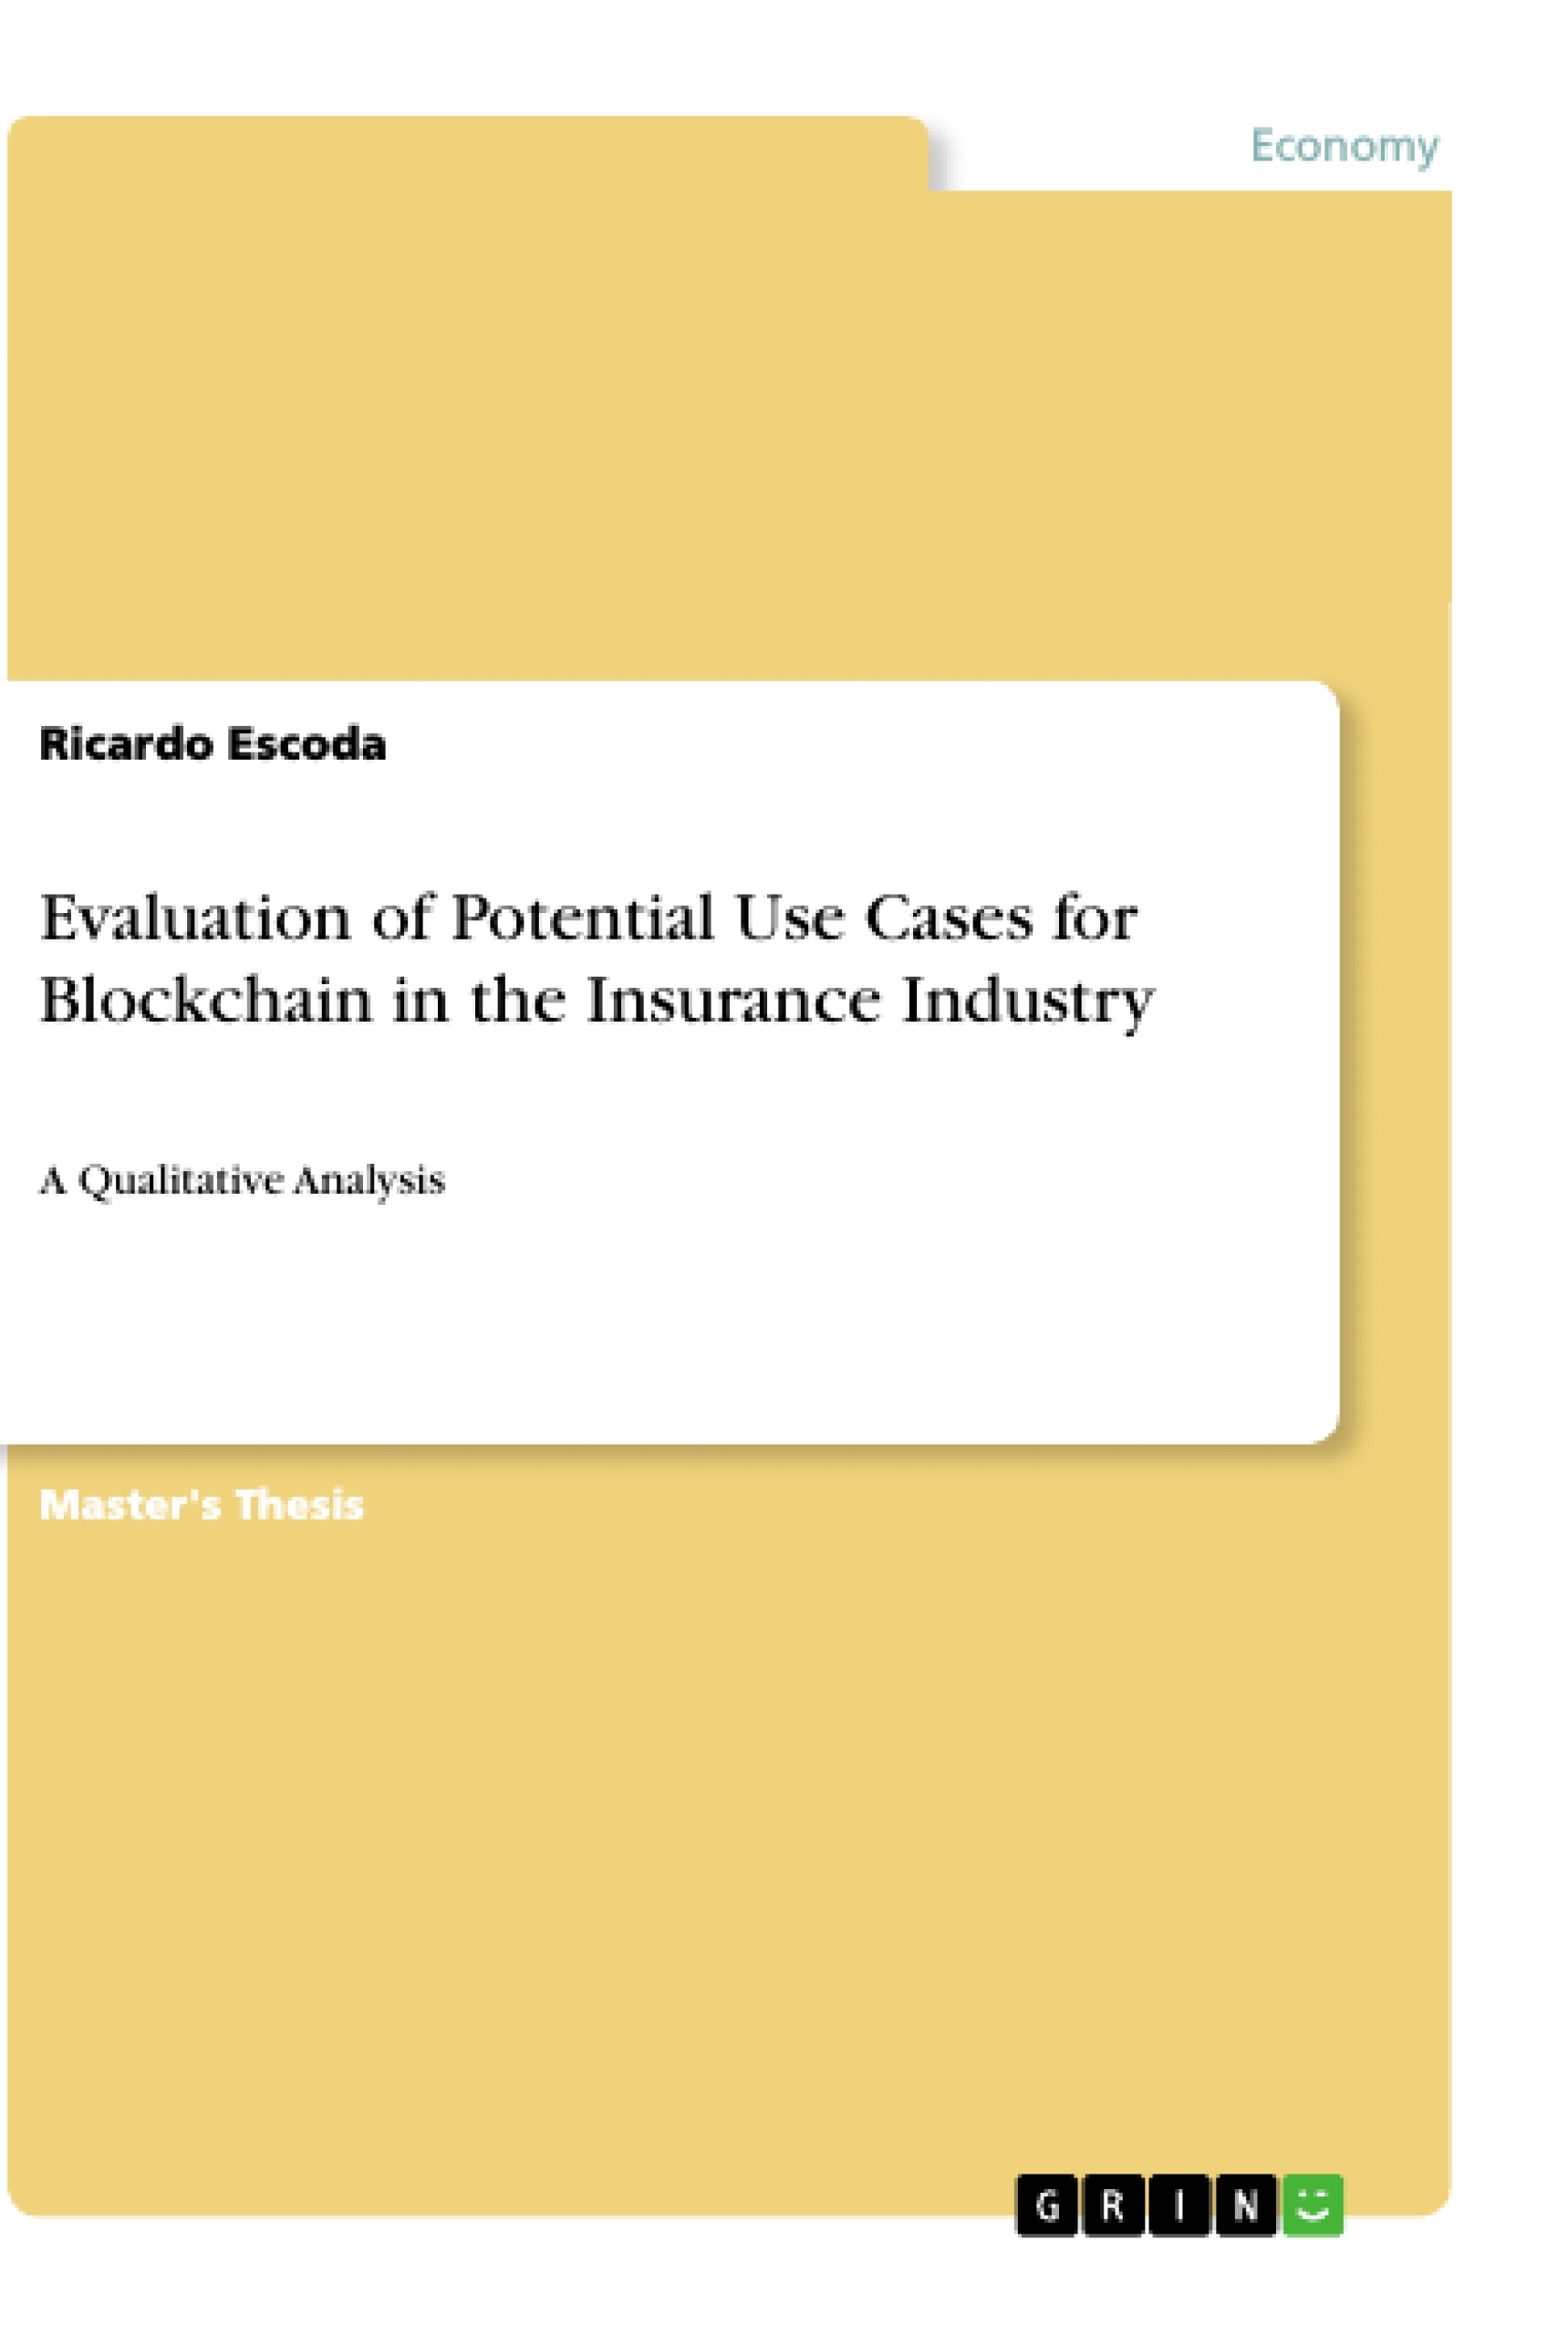 Title: Evaluation of Potential Use Cases for Blockchain in the Insurance Industry